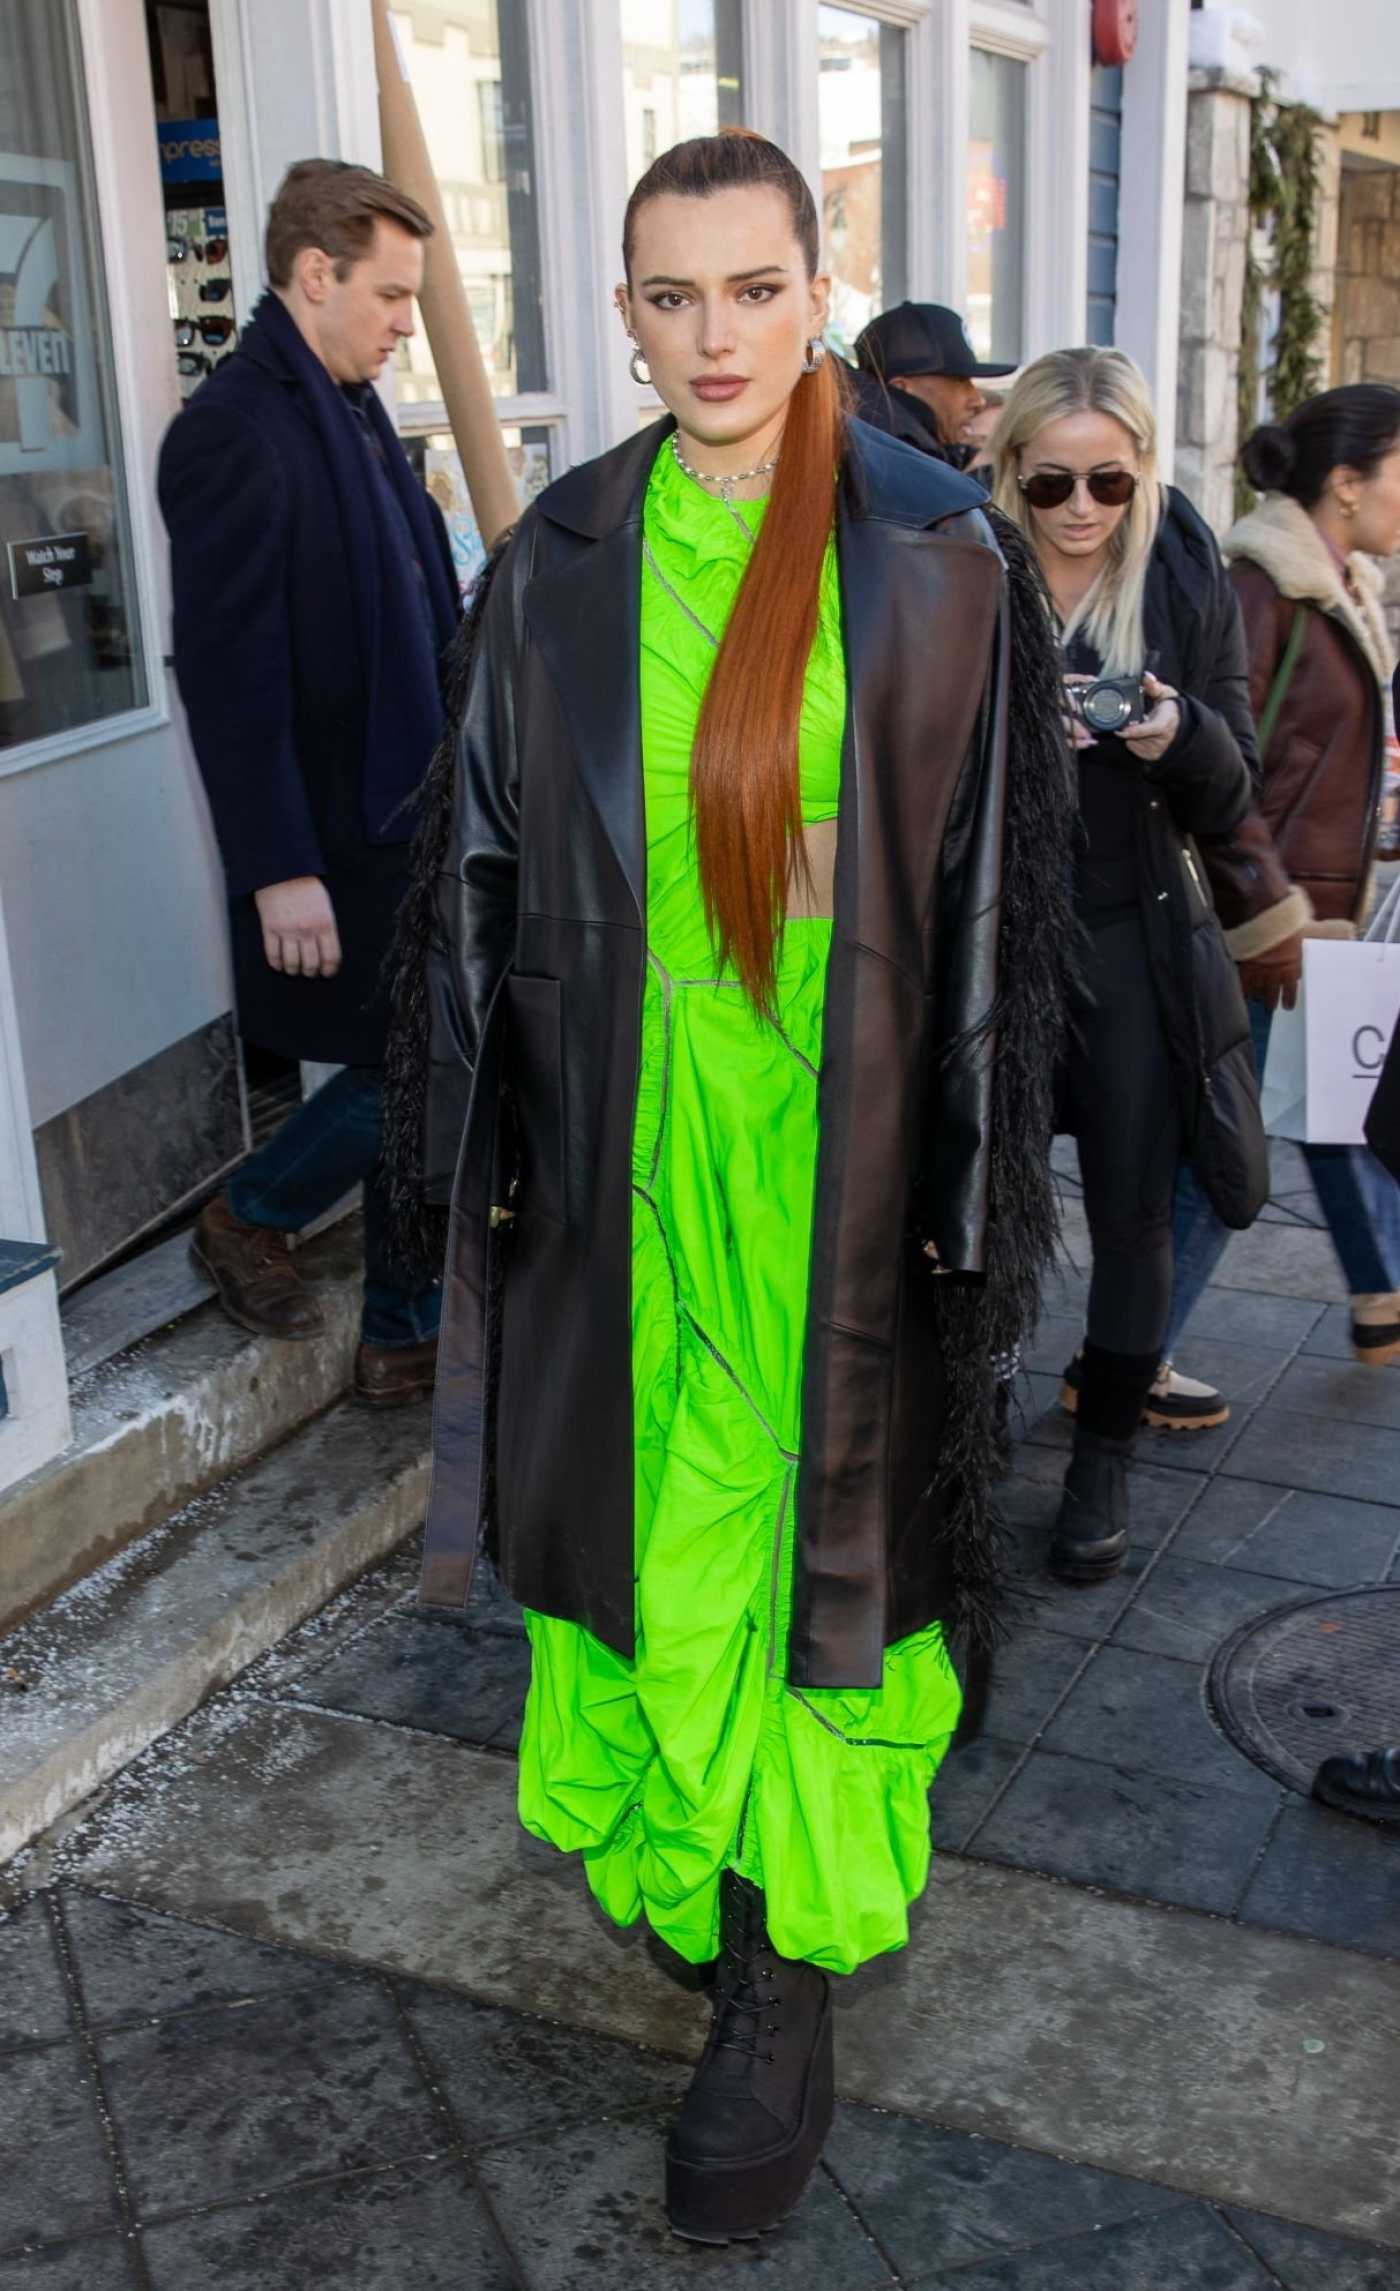 Bella Thorne in a Neon Green Dress Arrives at IndieWire Sundance Studio in Park City 01/23/2023